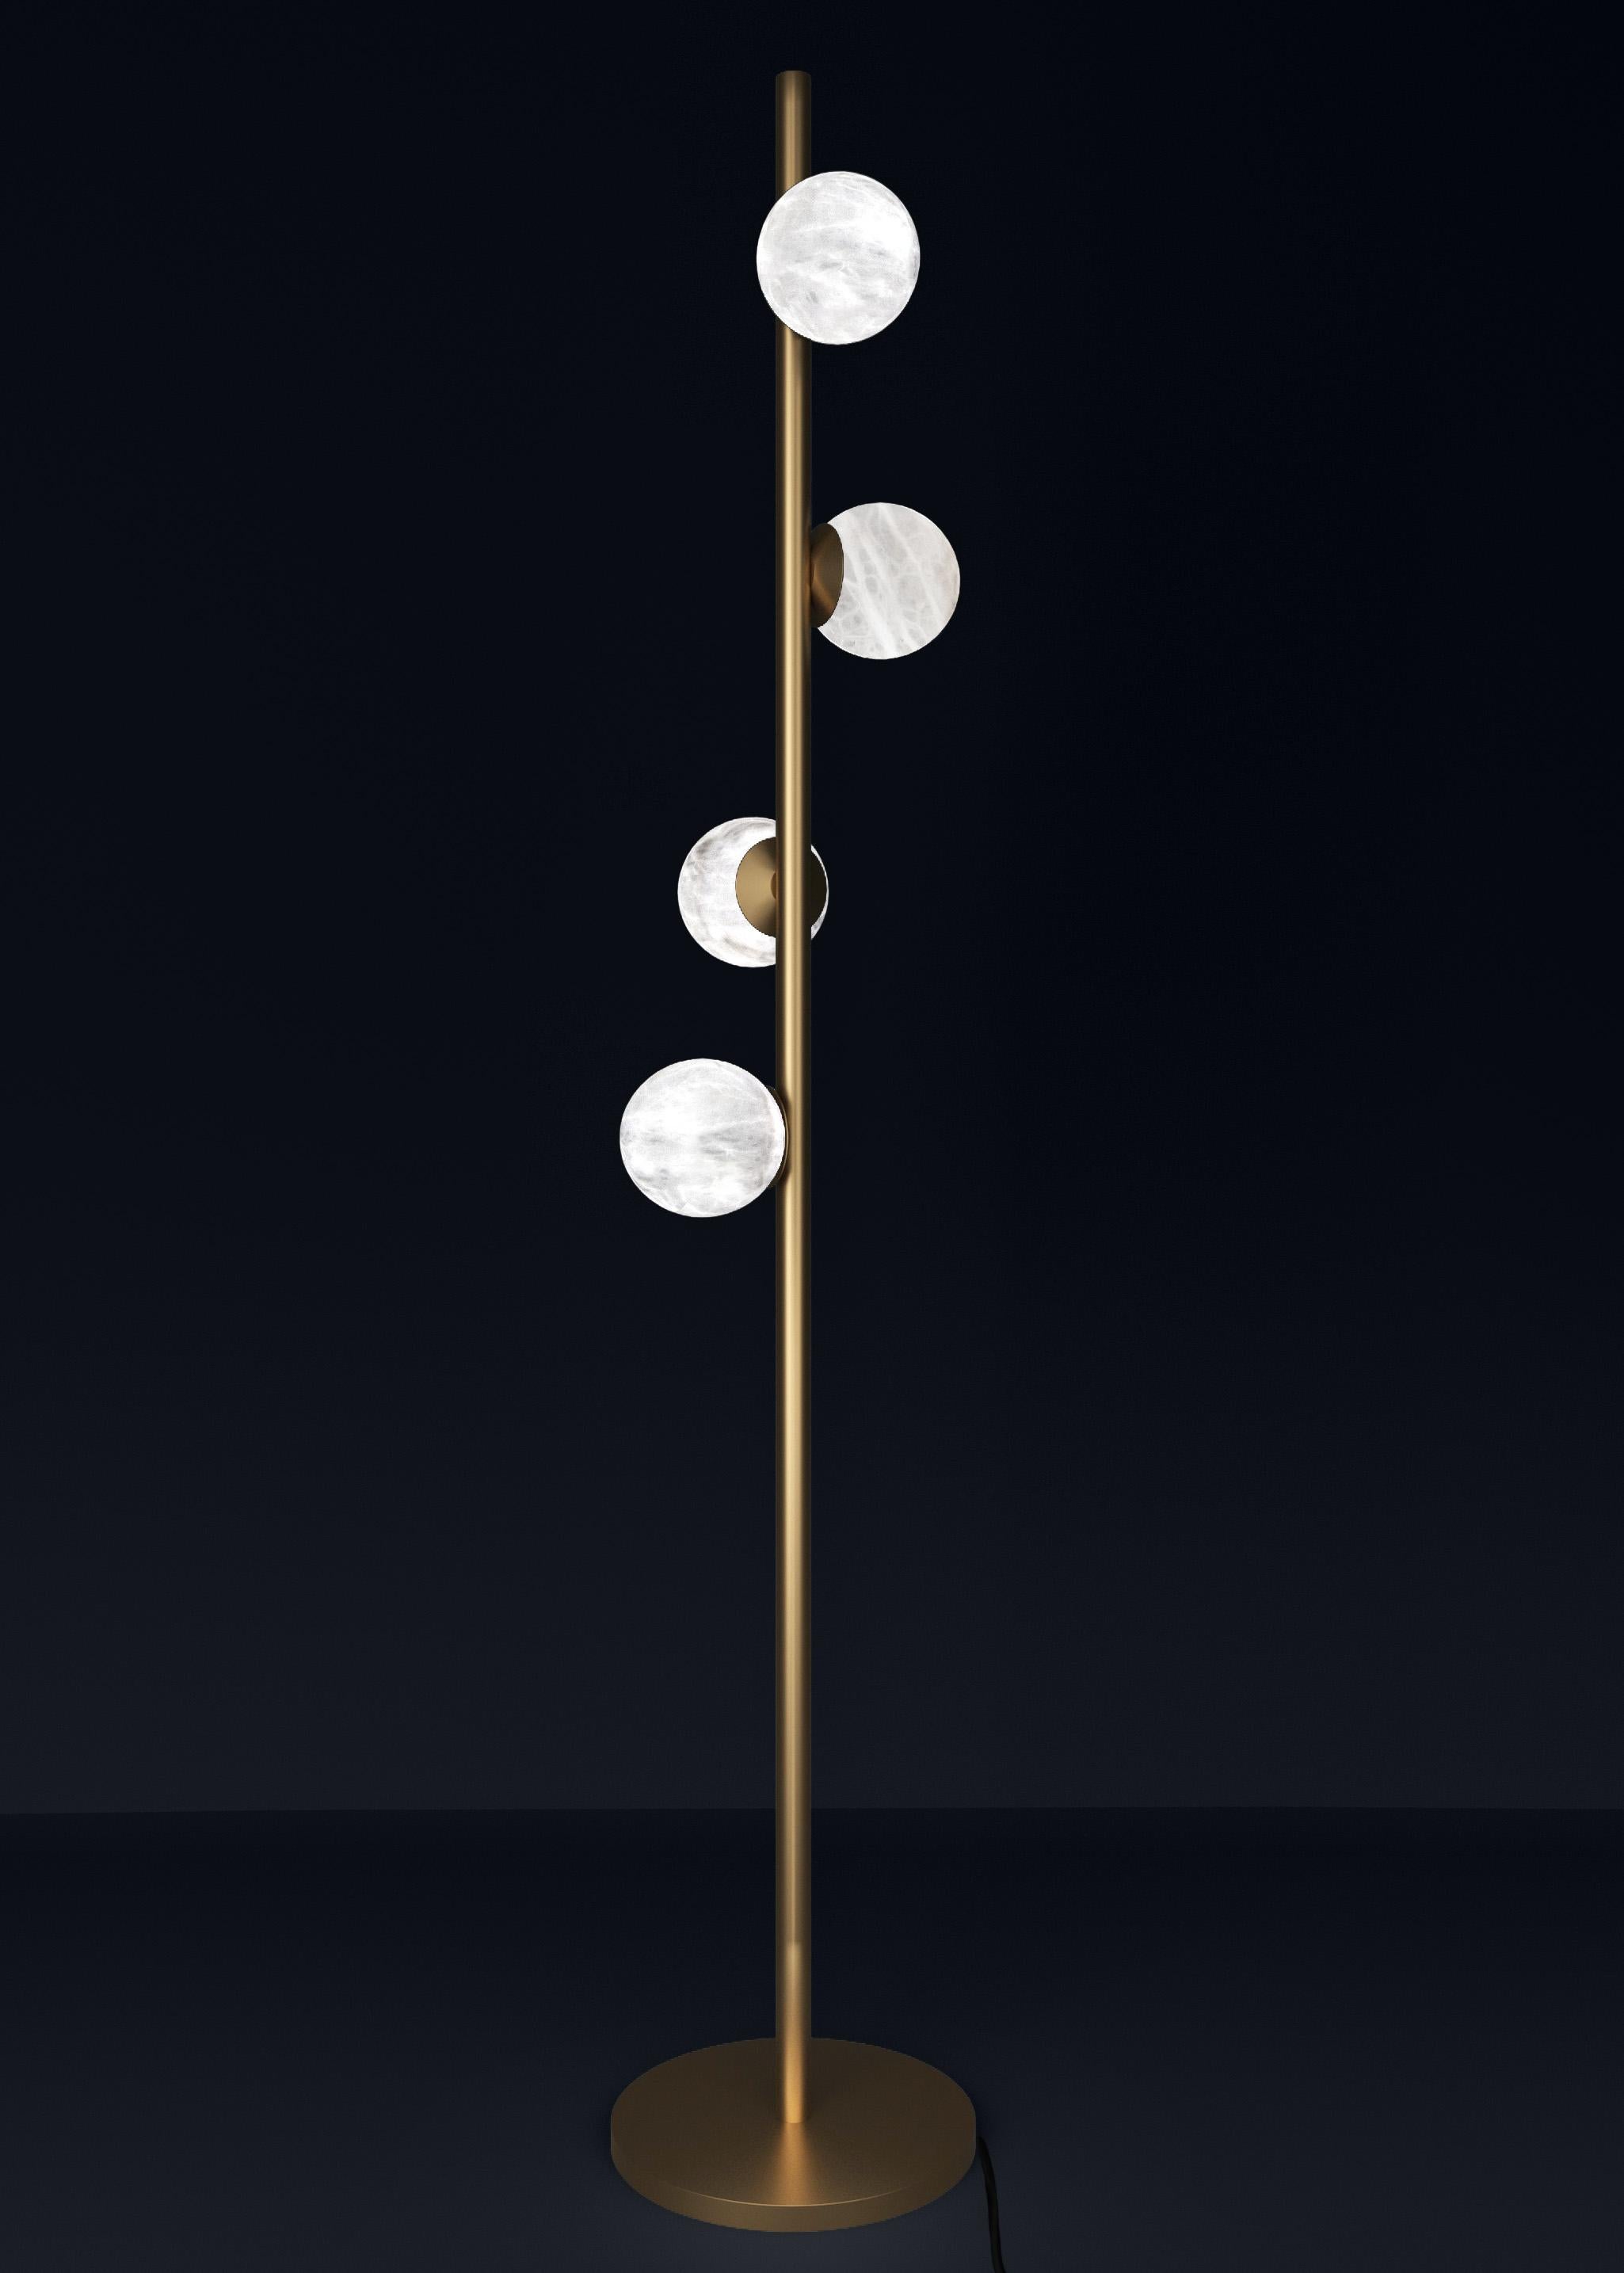 Ofione Bronze Floor Lamp by Alabastro Italiano
Dimensions: D 50 x W 50 x H 170 cm.
Materials: White alabaster and bronze.

Available in different finishes: Shiny Silver, Bronze, Brushed Brass, Ruggine of Florence, Brushed Burnished, Shiny Gold,